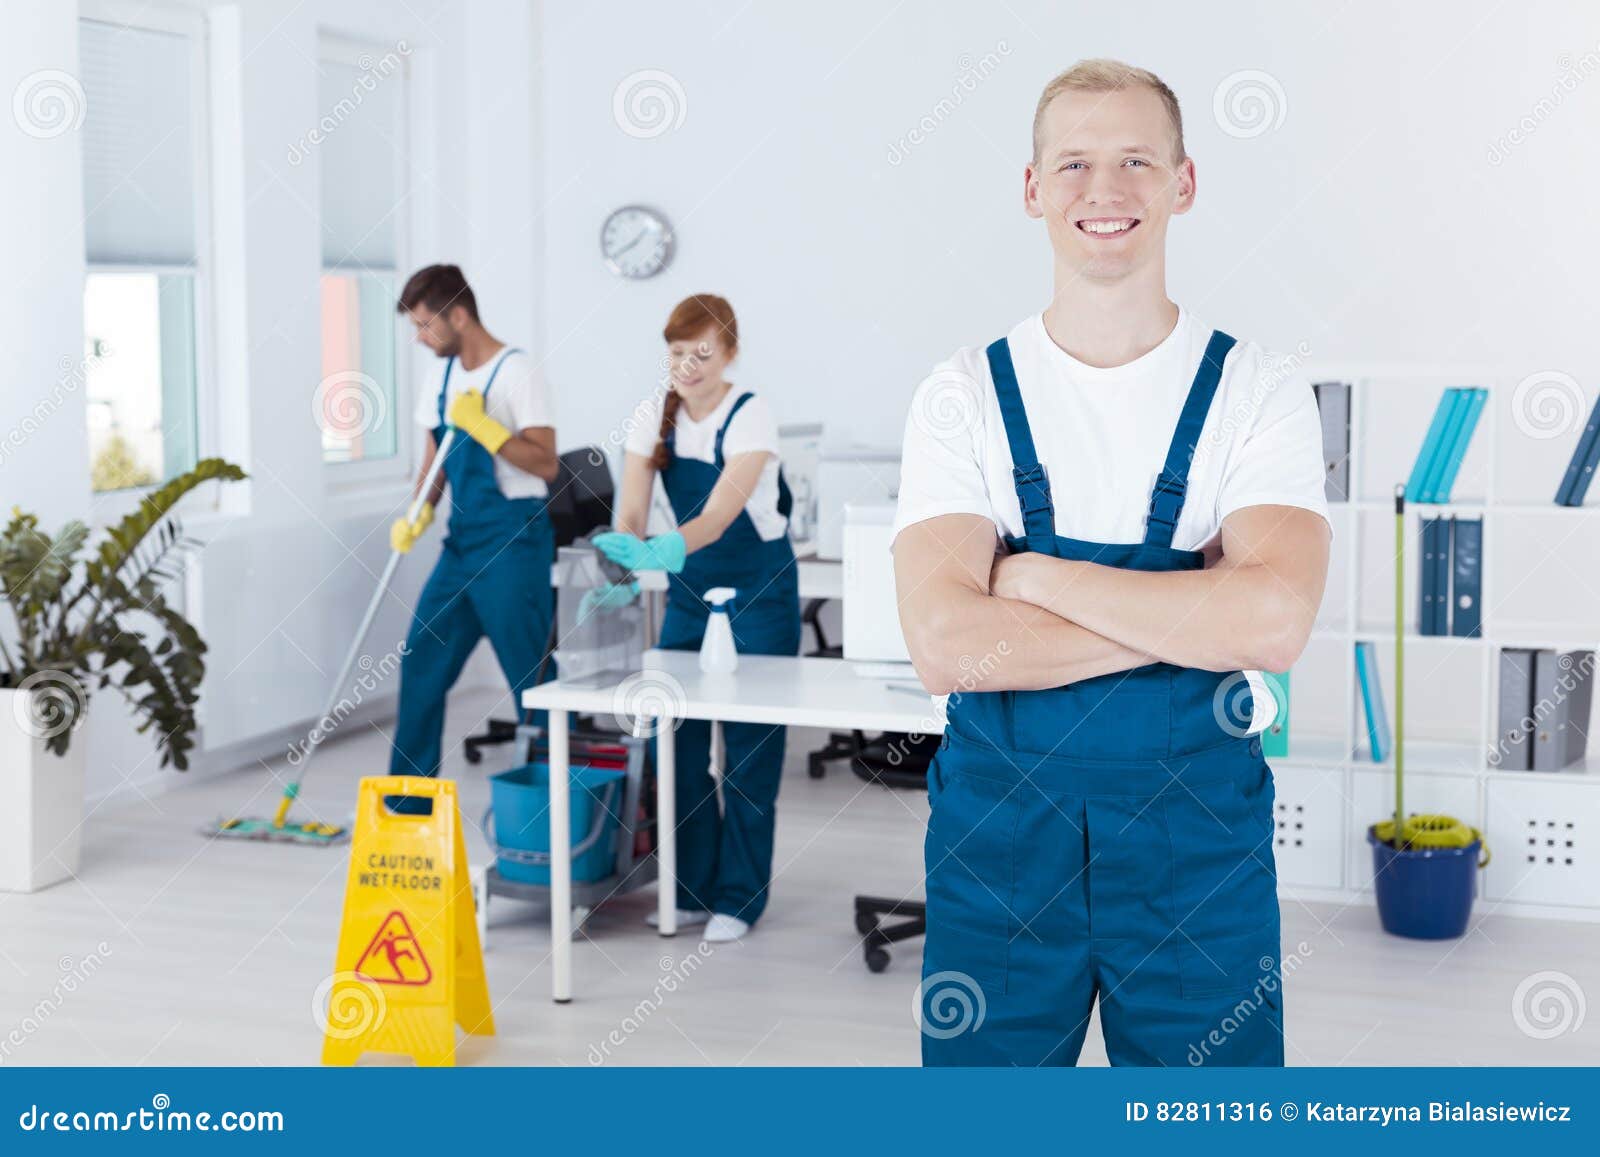 young cleaning staff